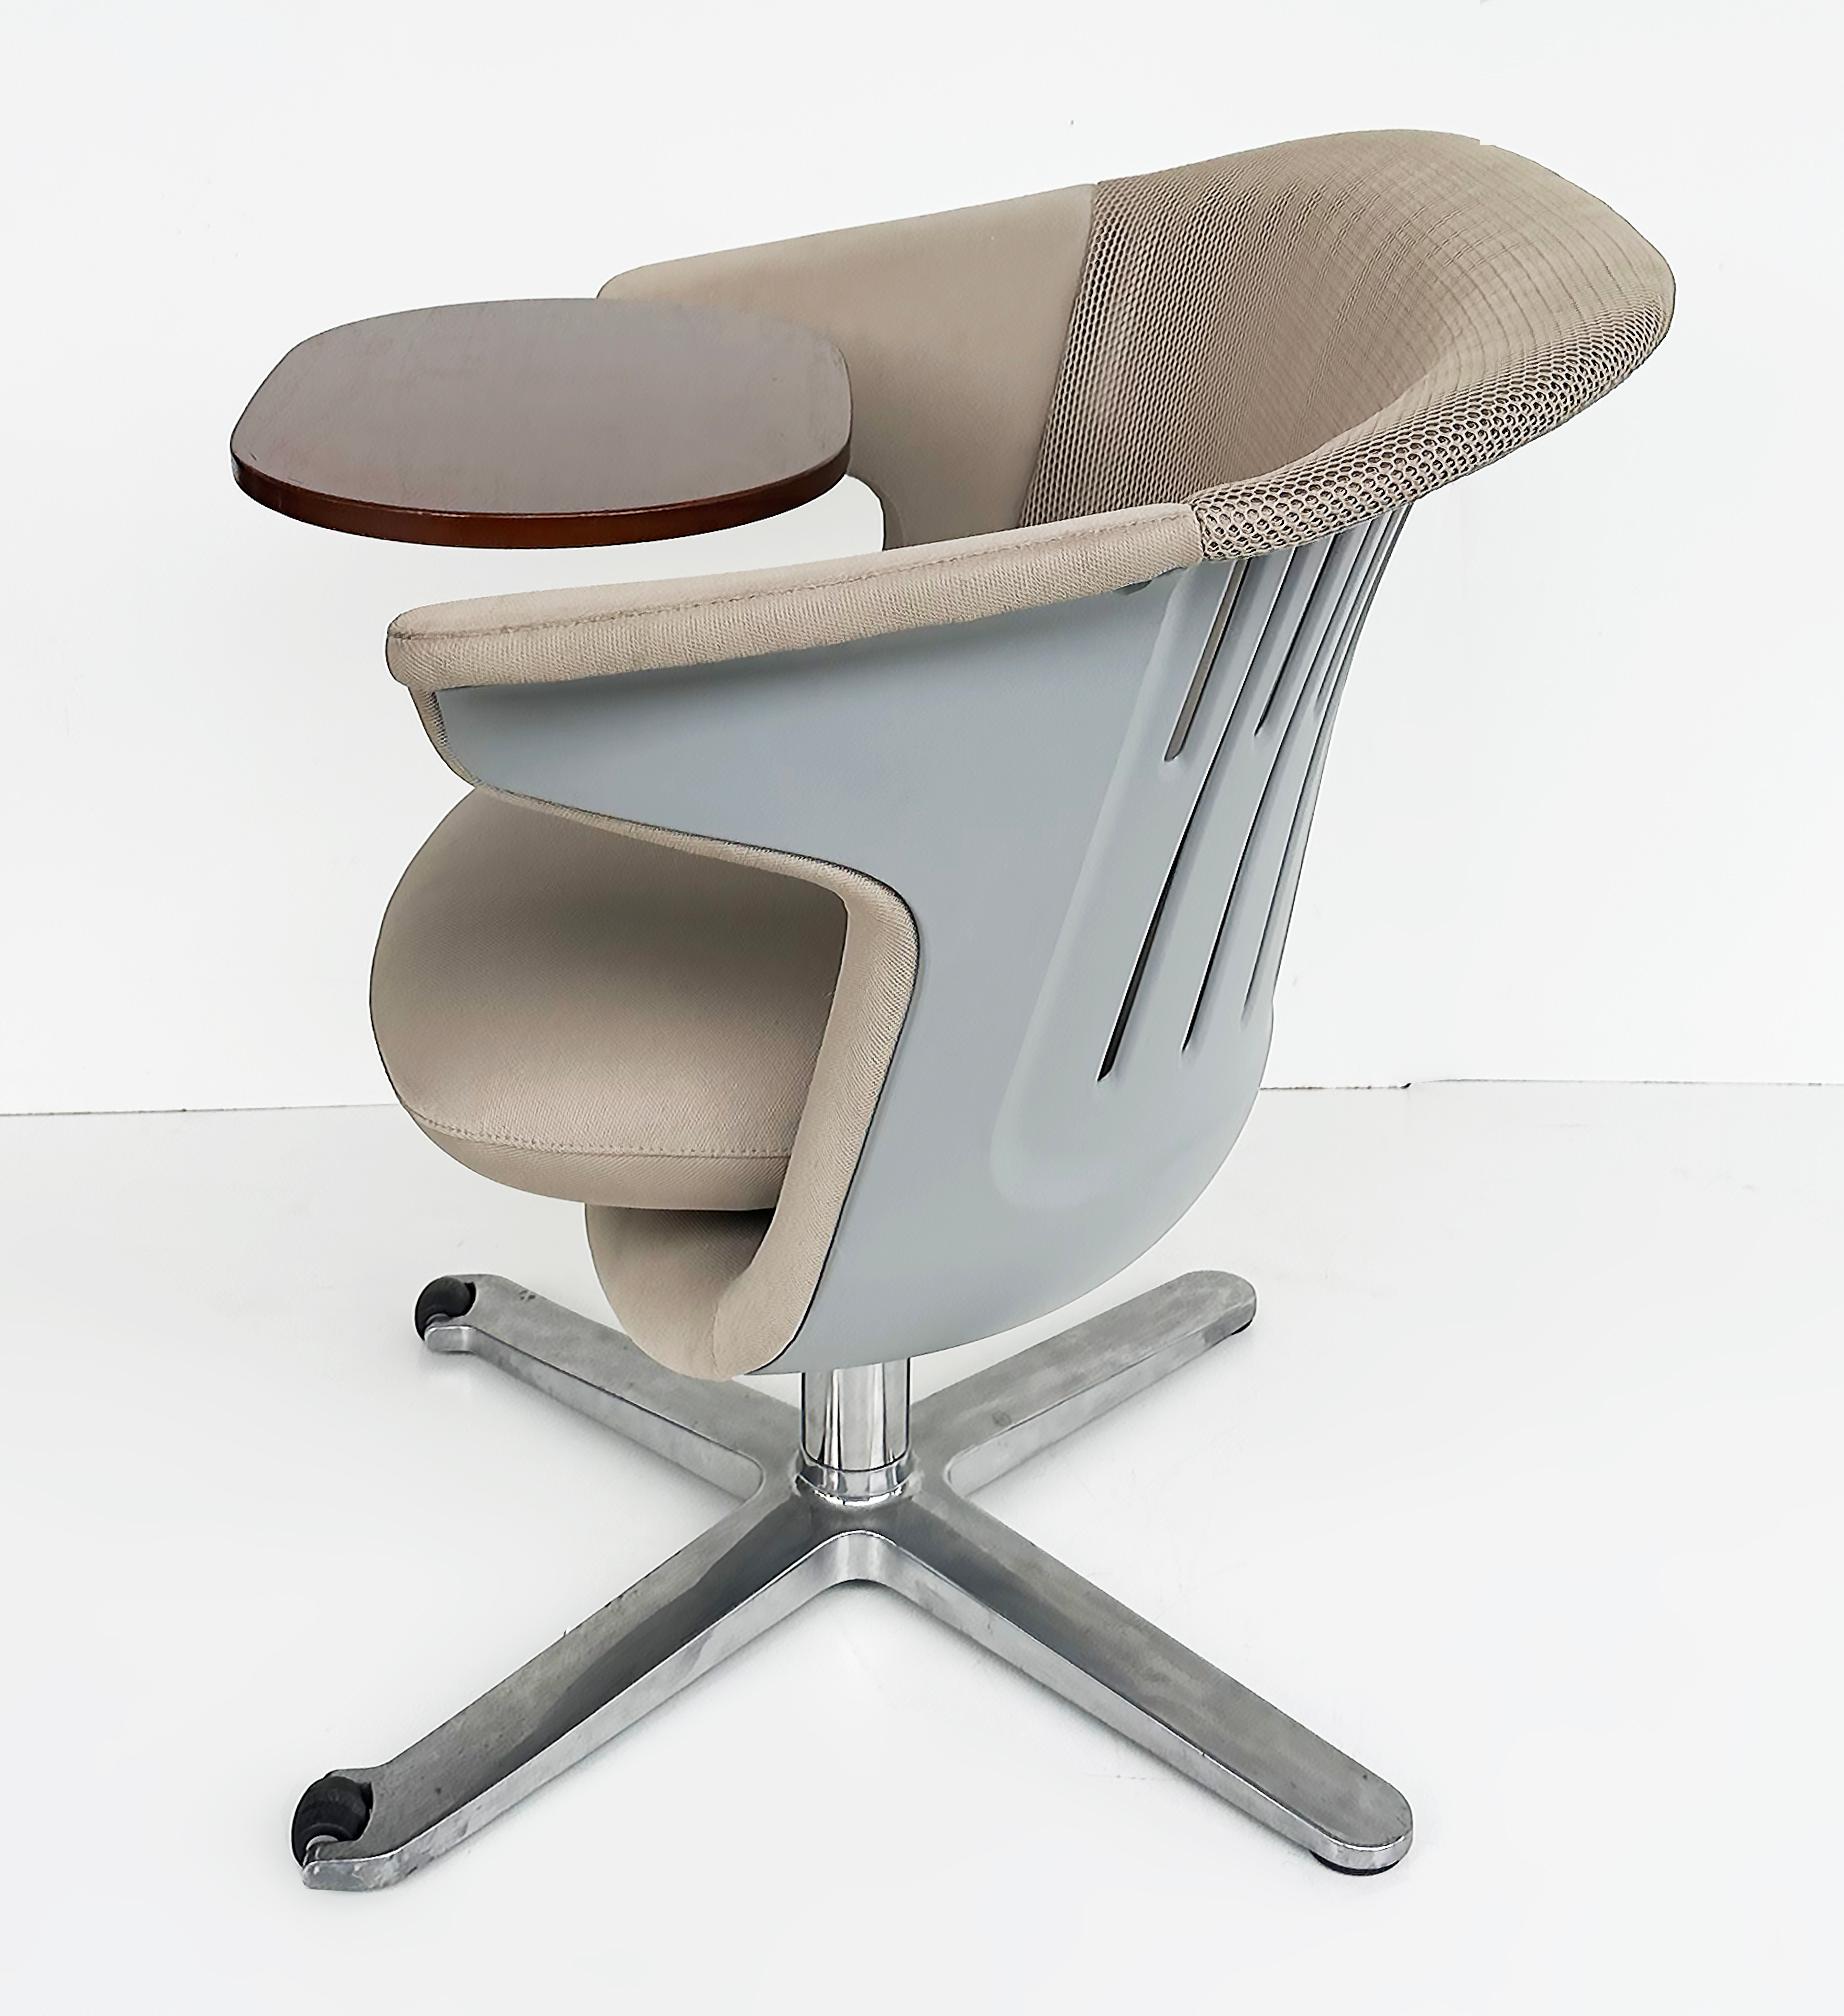 Steelcase i2i Ergonomic Dual Swivel Graphite Lounge Chair with Writing Tablet For Sale 1